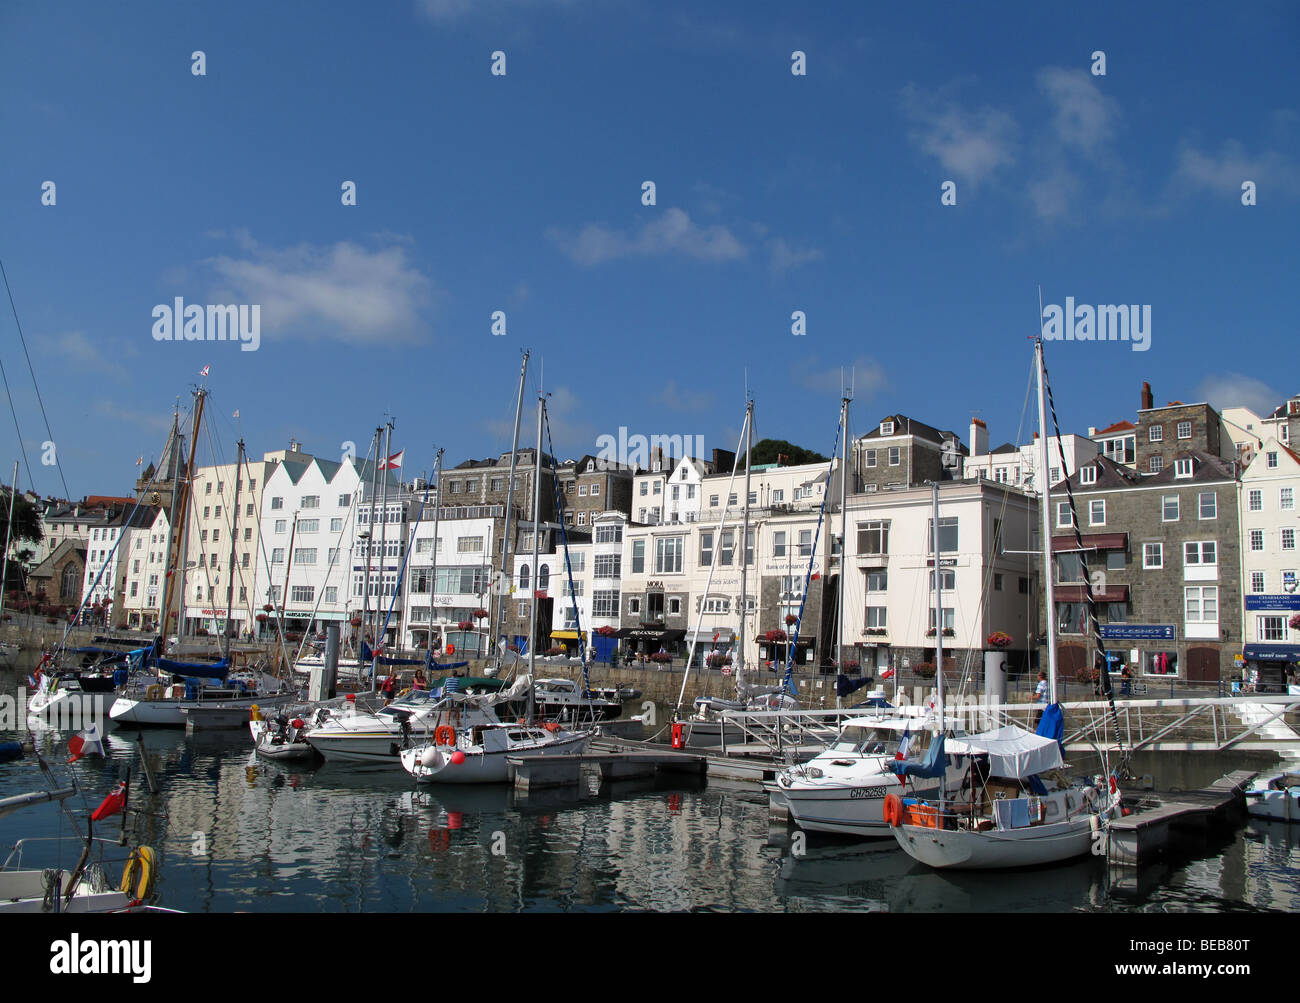 The harbour or harbor in St Peter's Port in Guernsey, Channel Islands Stock Photo